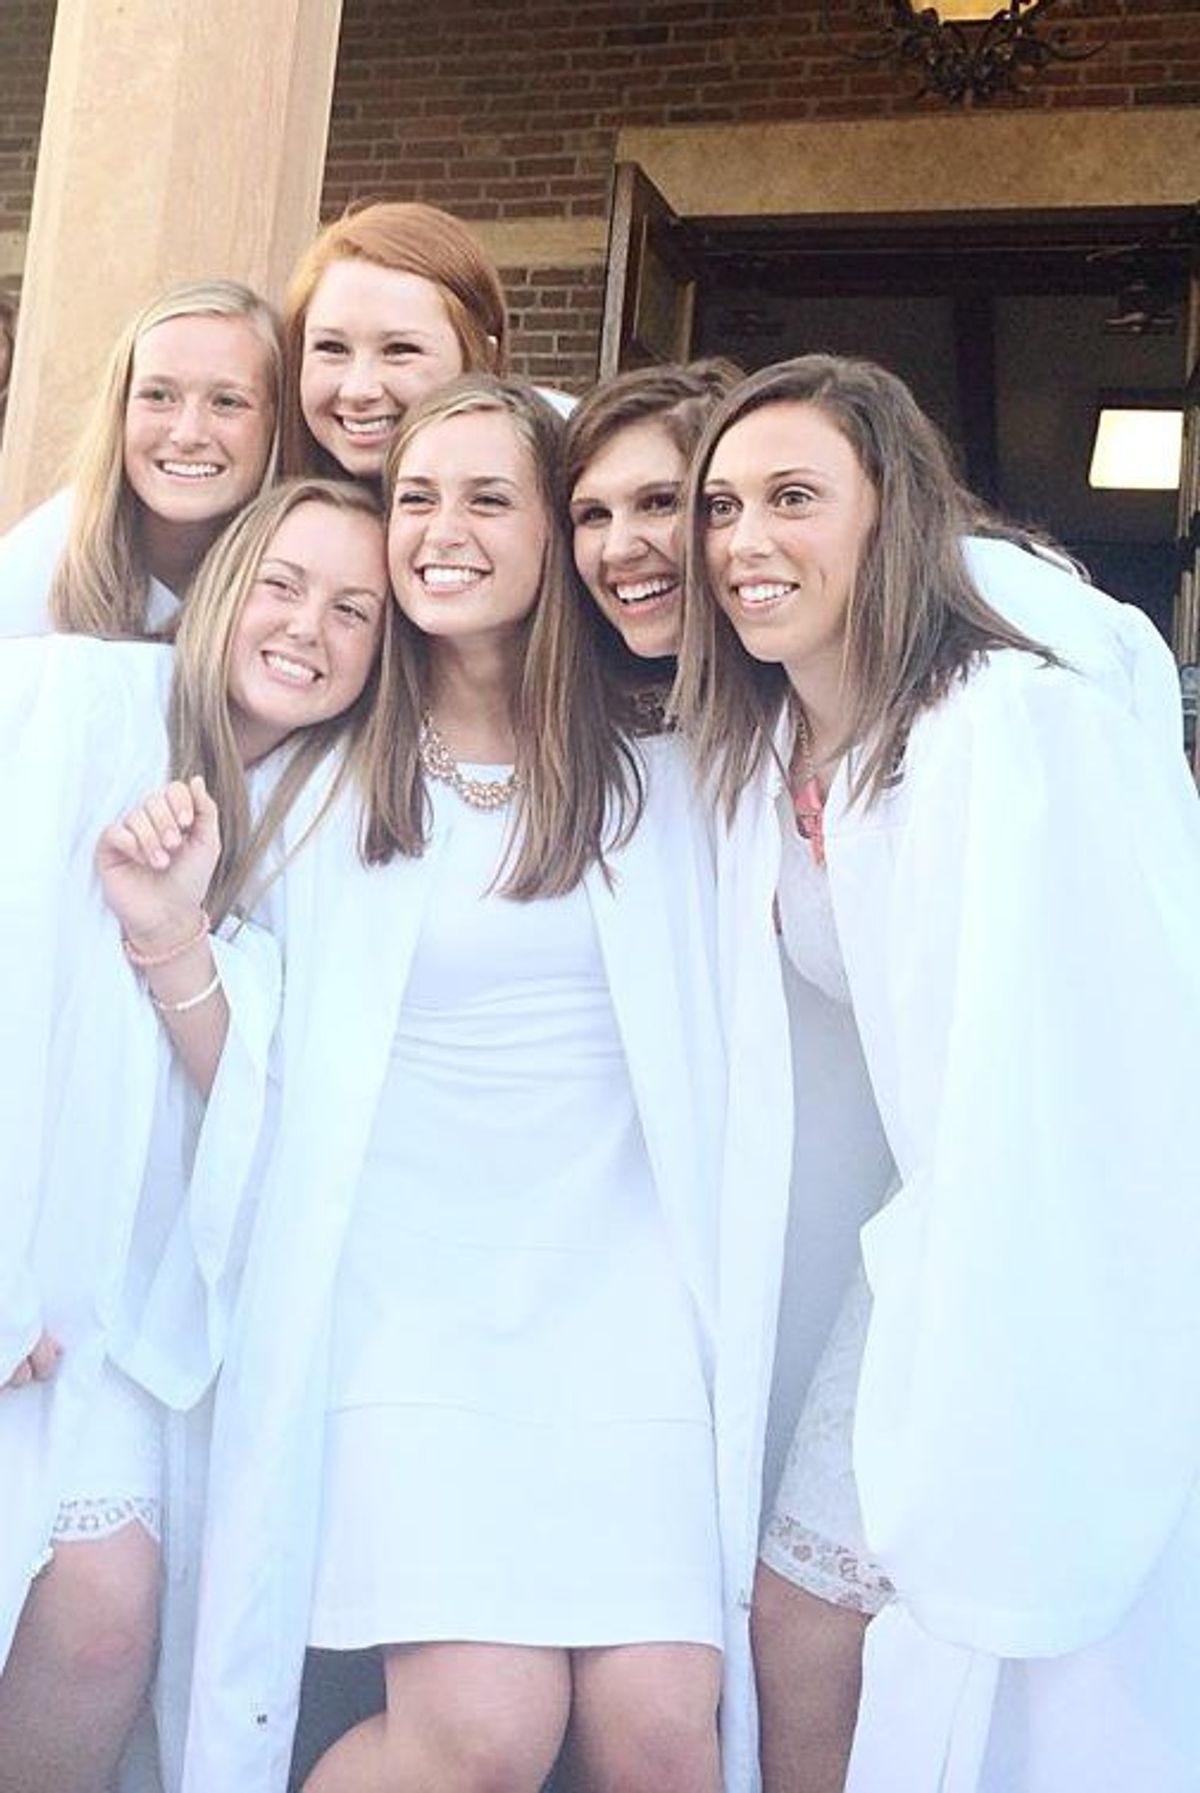 What It's Like Coming To College From An All-Girl Catholic School